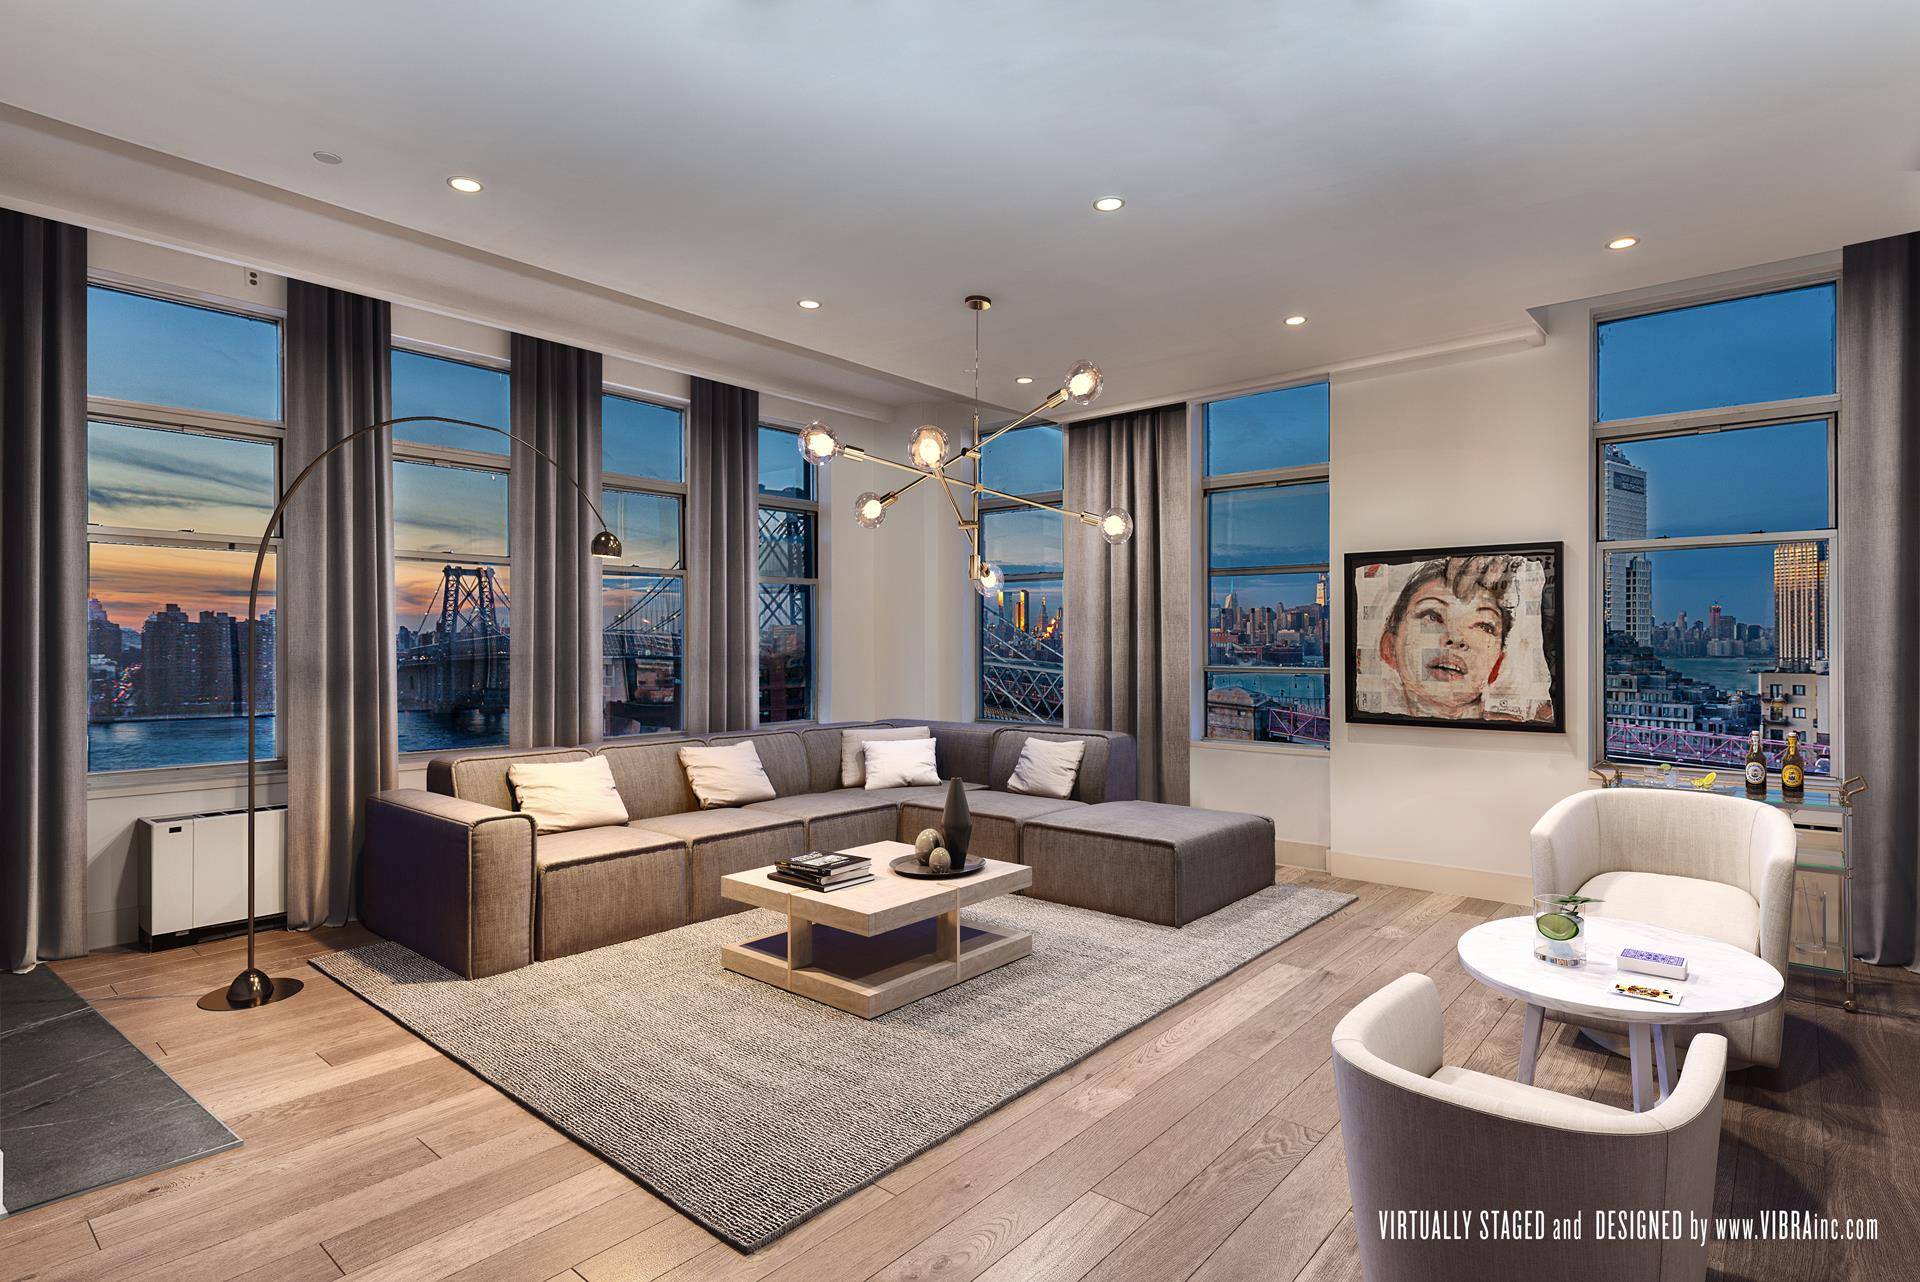 A detailed 3D tour is available upon request from the listing broker Loft 10D is a massive, single floor corner residence that offers dramatic exposures from points north, south, and ...